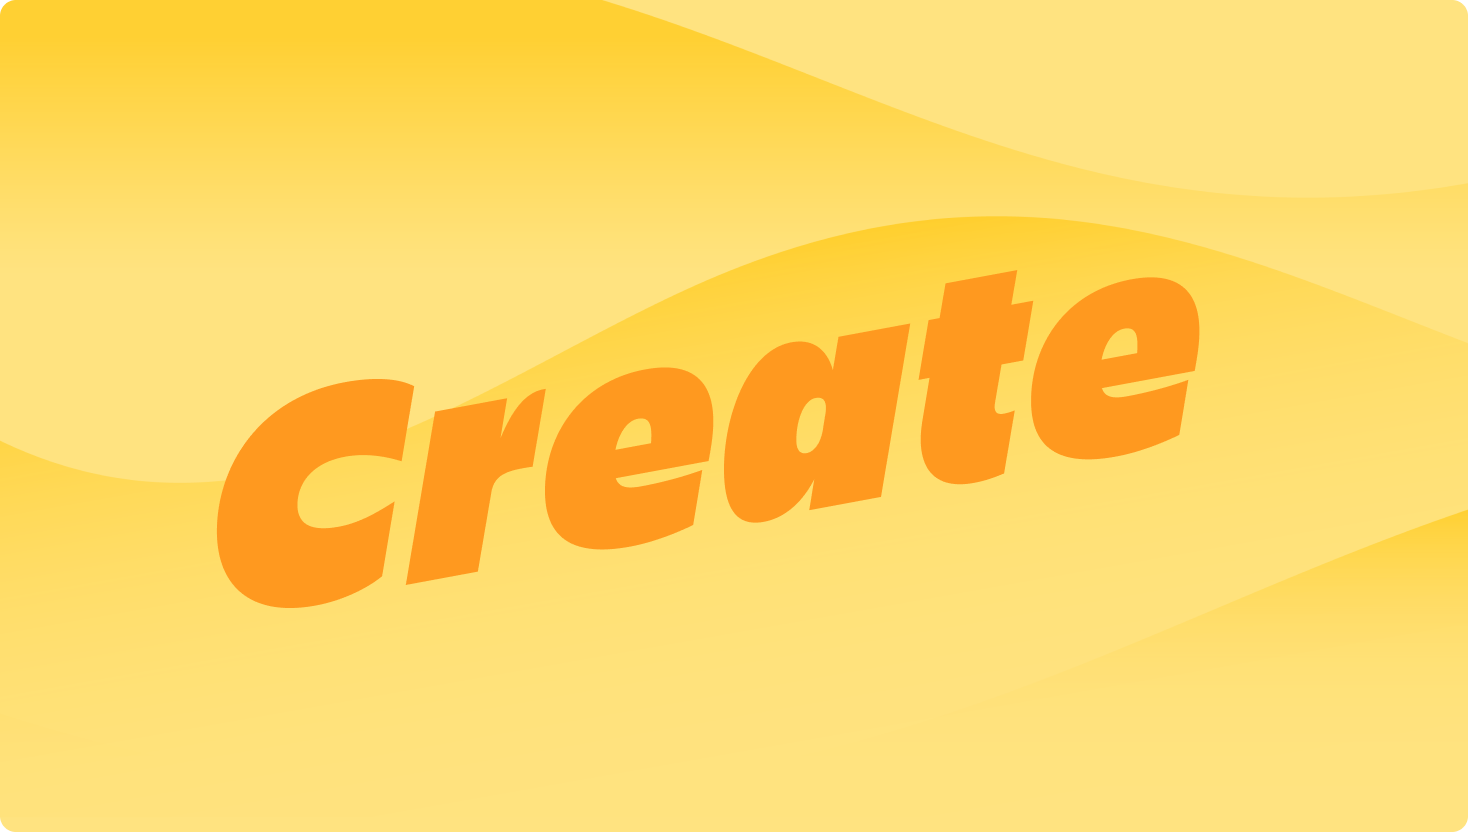 A yellow wave image with the word create featured prominently